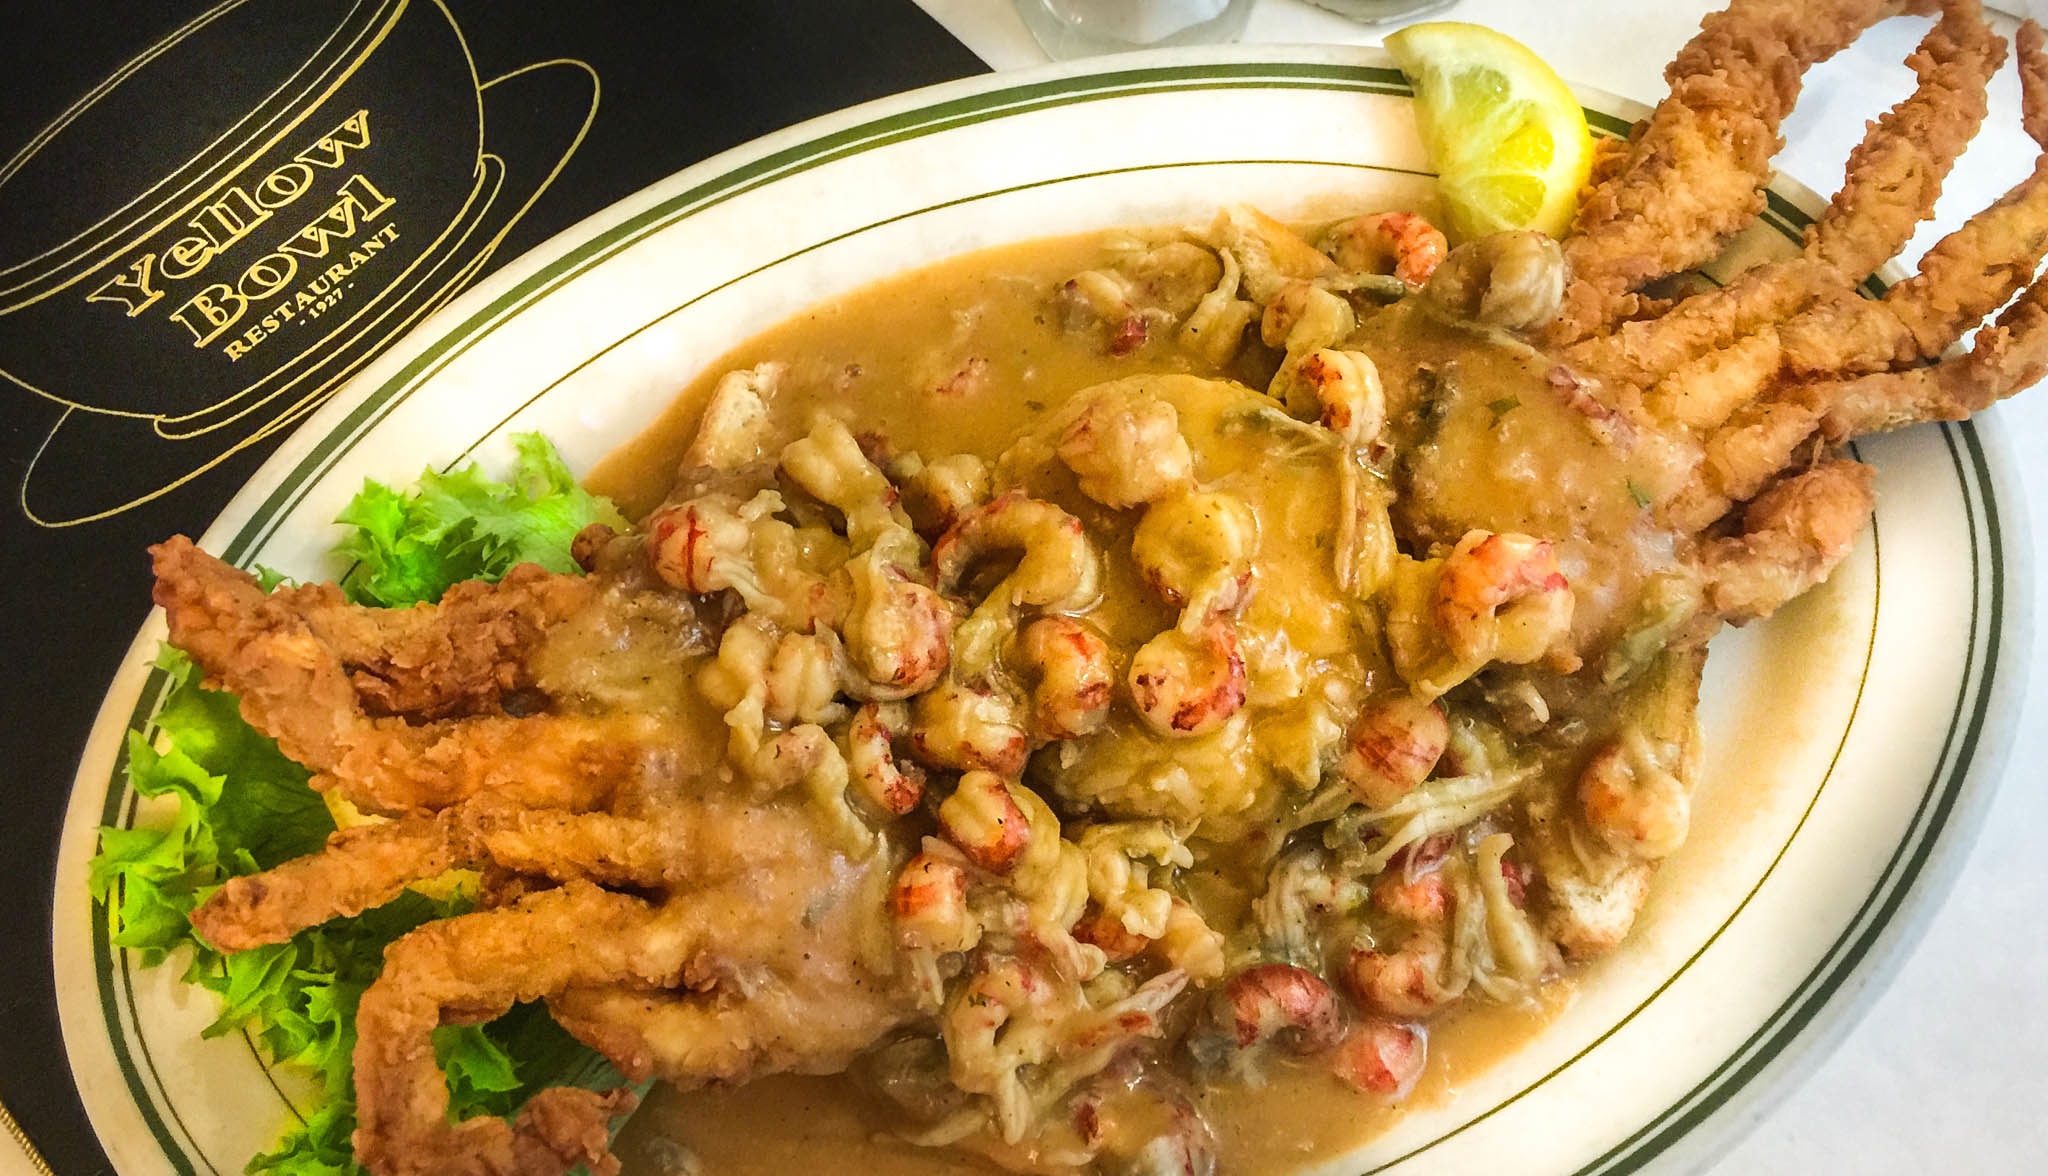 Fried Softshell Crab topped with Crawfish Étouffée is a rural